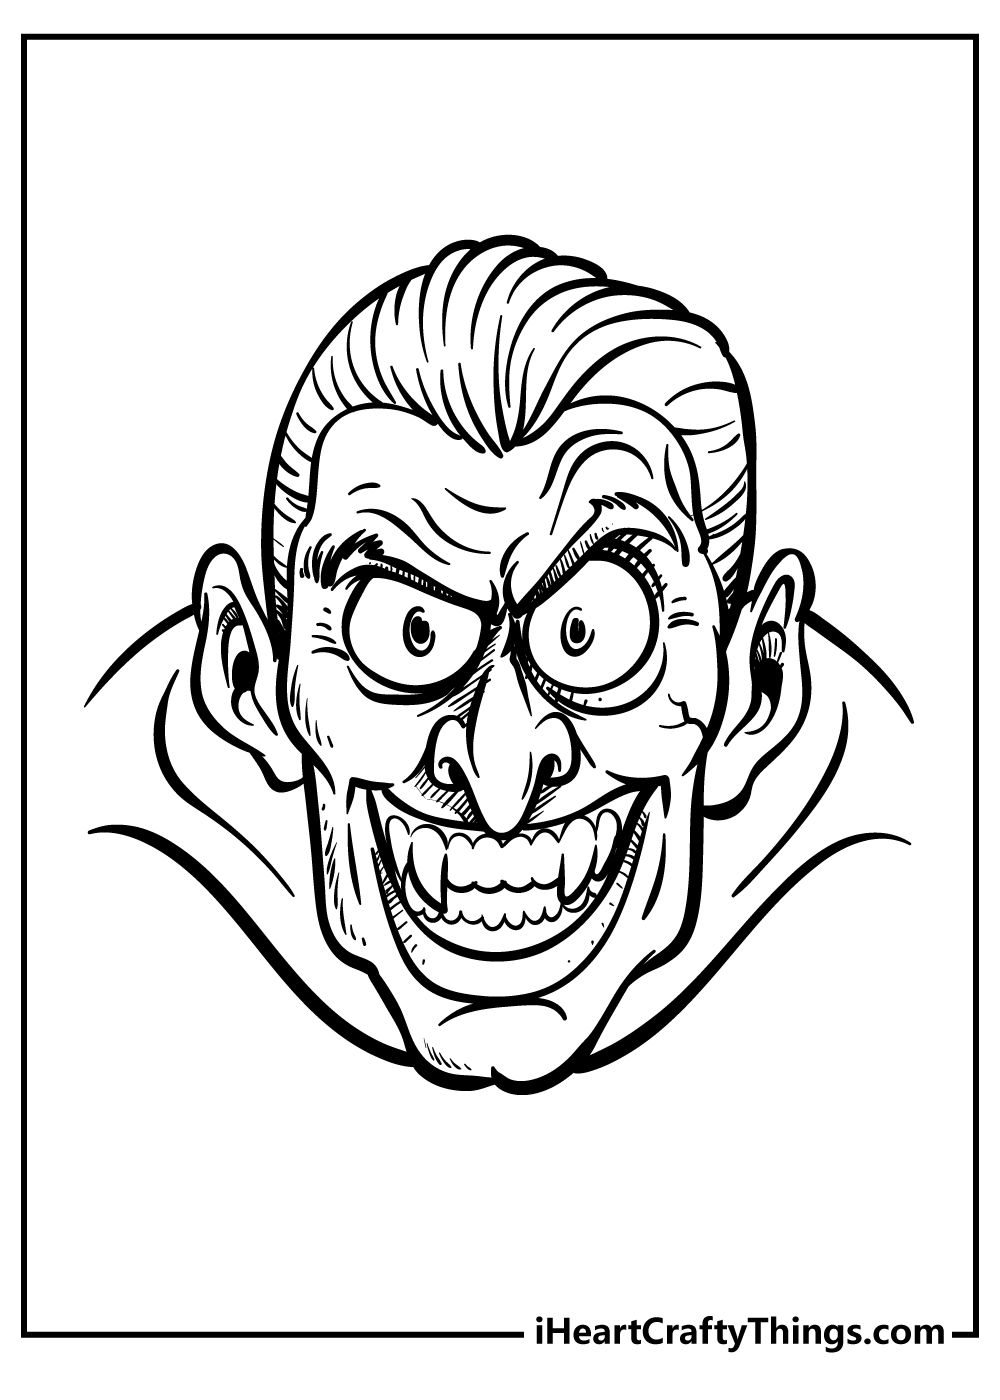 Count Dracula Coloring Pages free pdf download